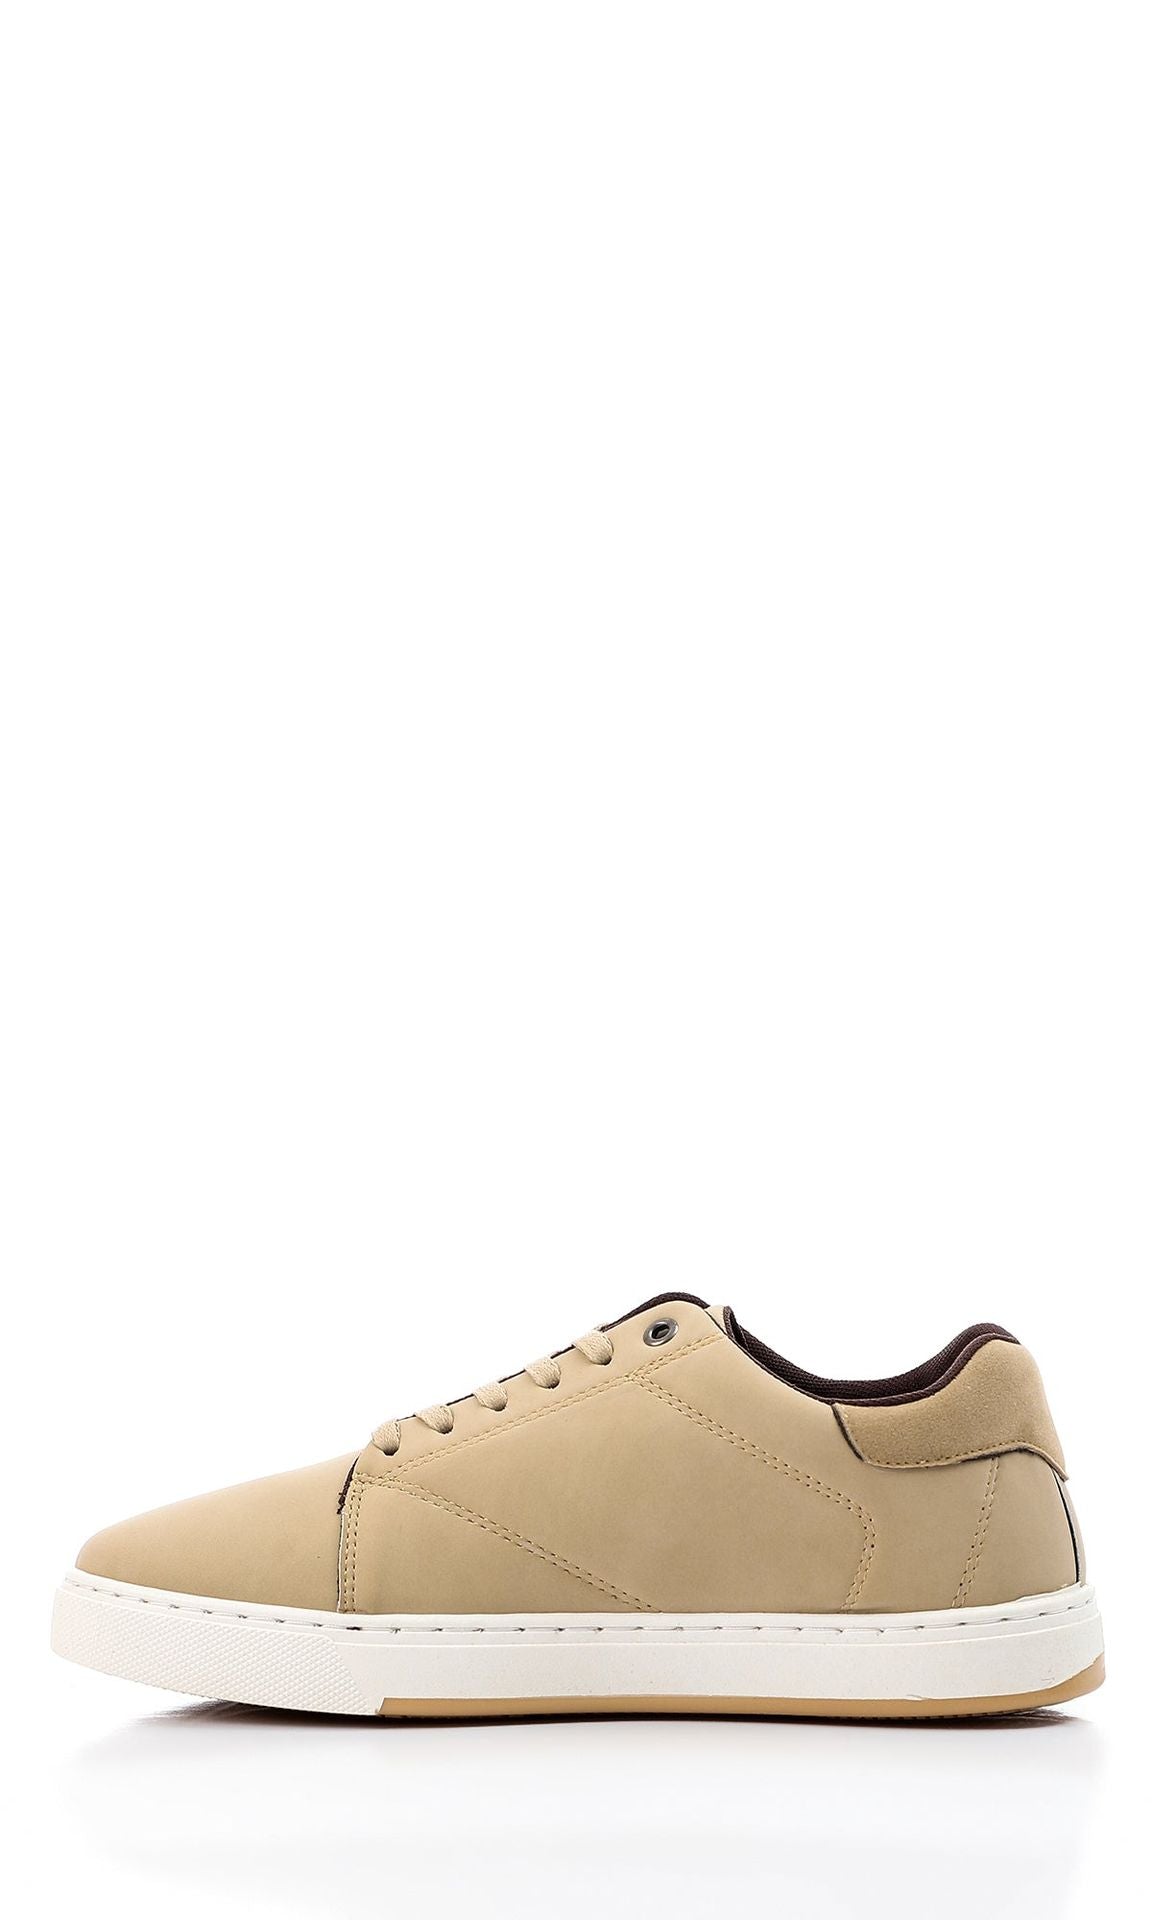 49901 Hommes Chaussures